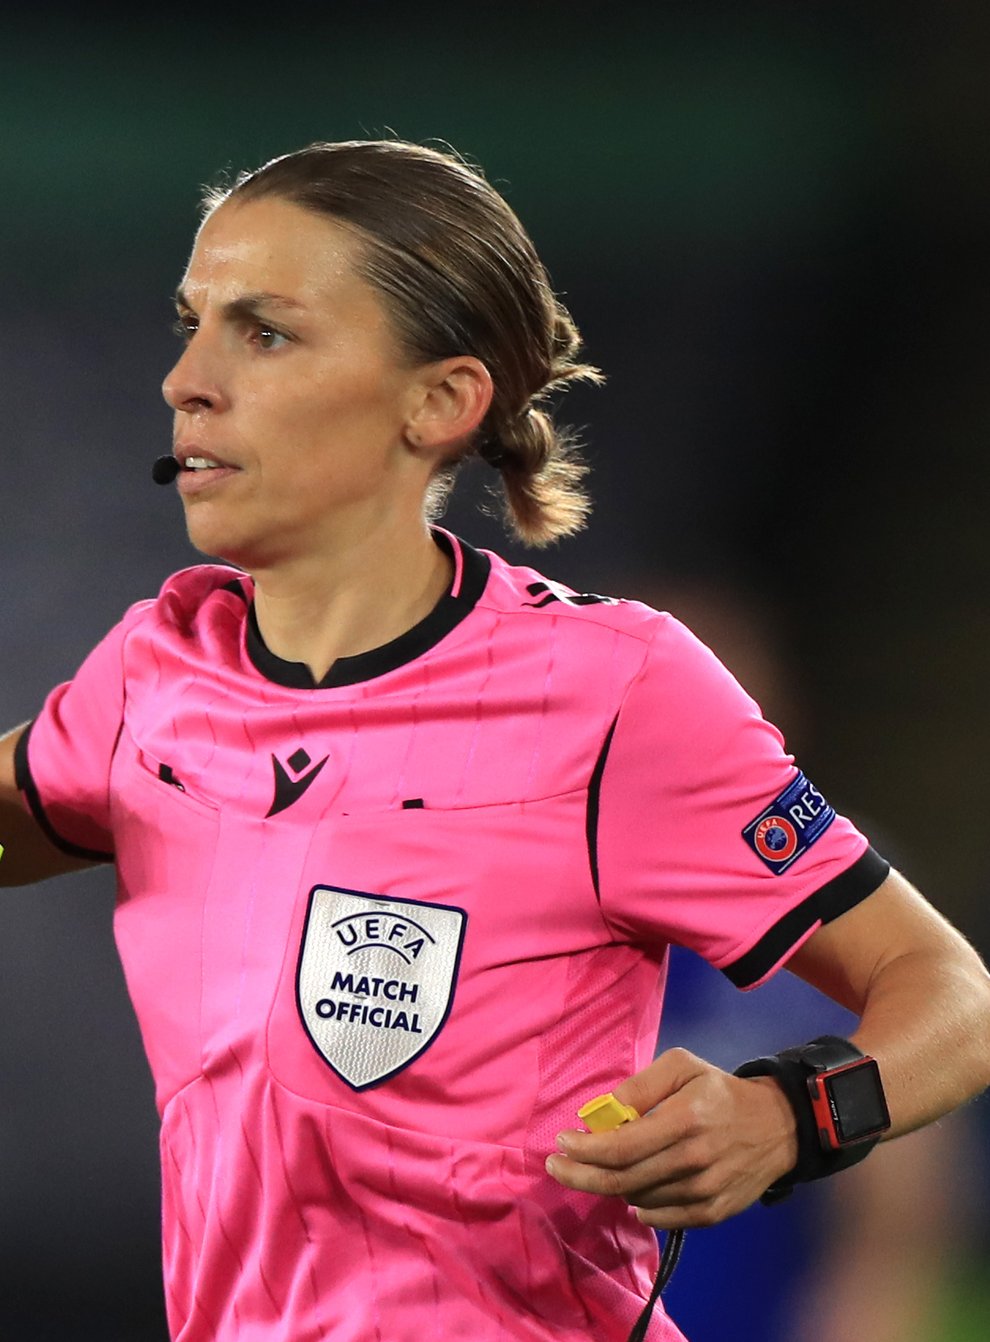 Stephanie Frappart is one of three women listed to referee matches at the men’s World Cup in Qatar later this year (Mike Egerton/PA)